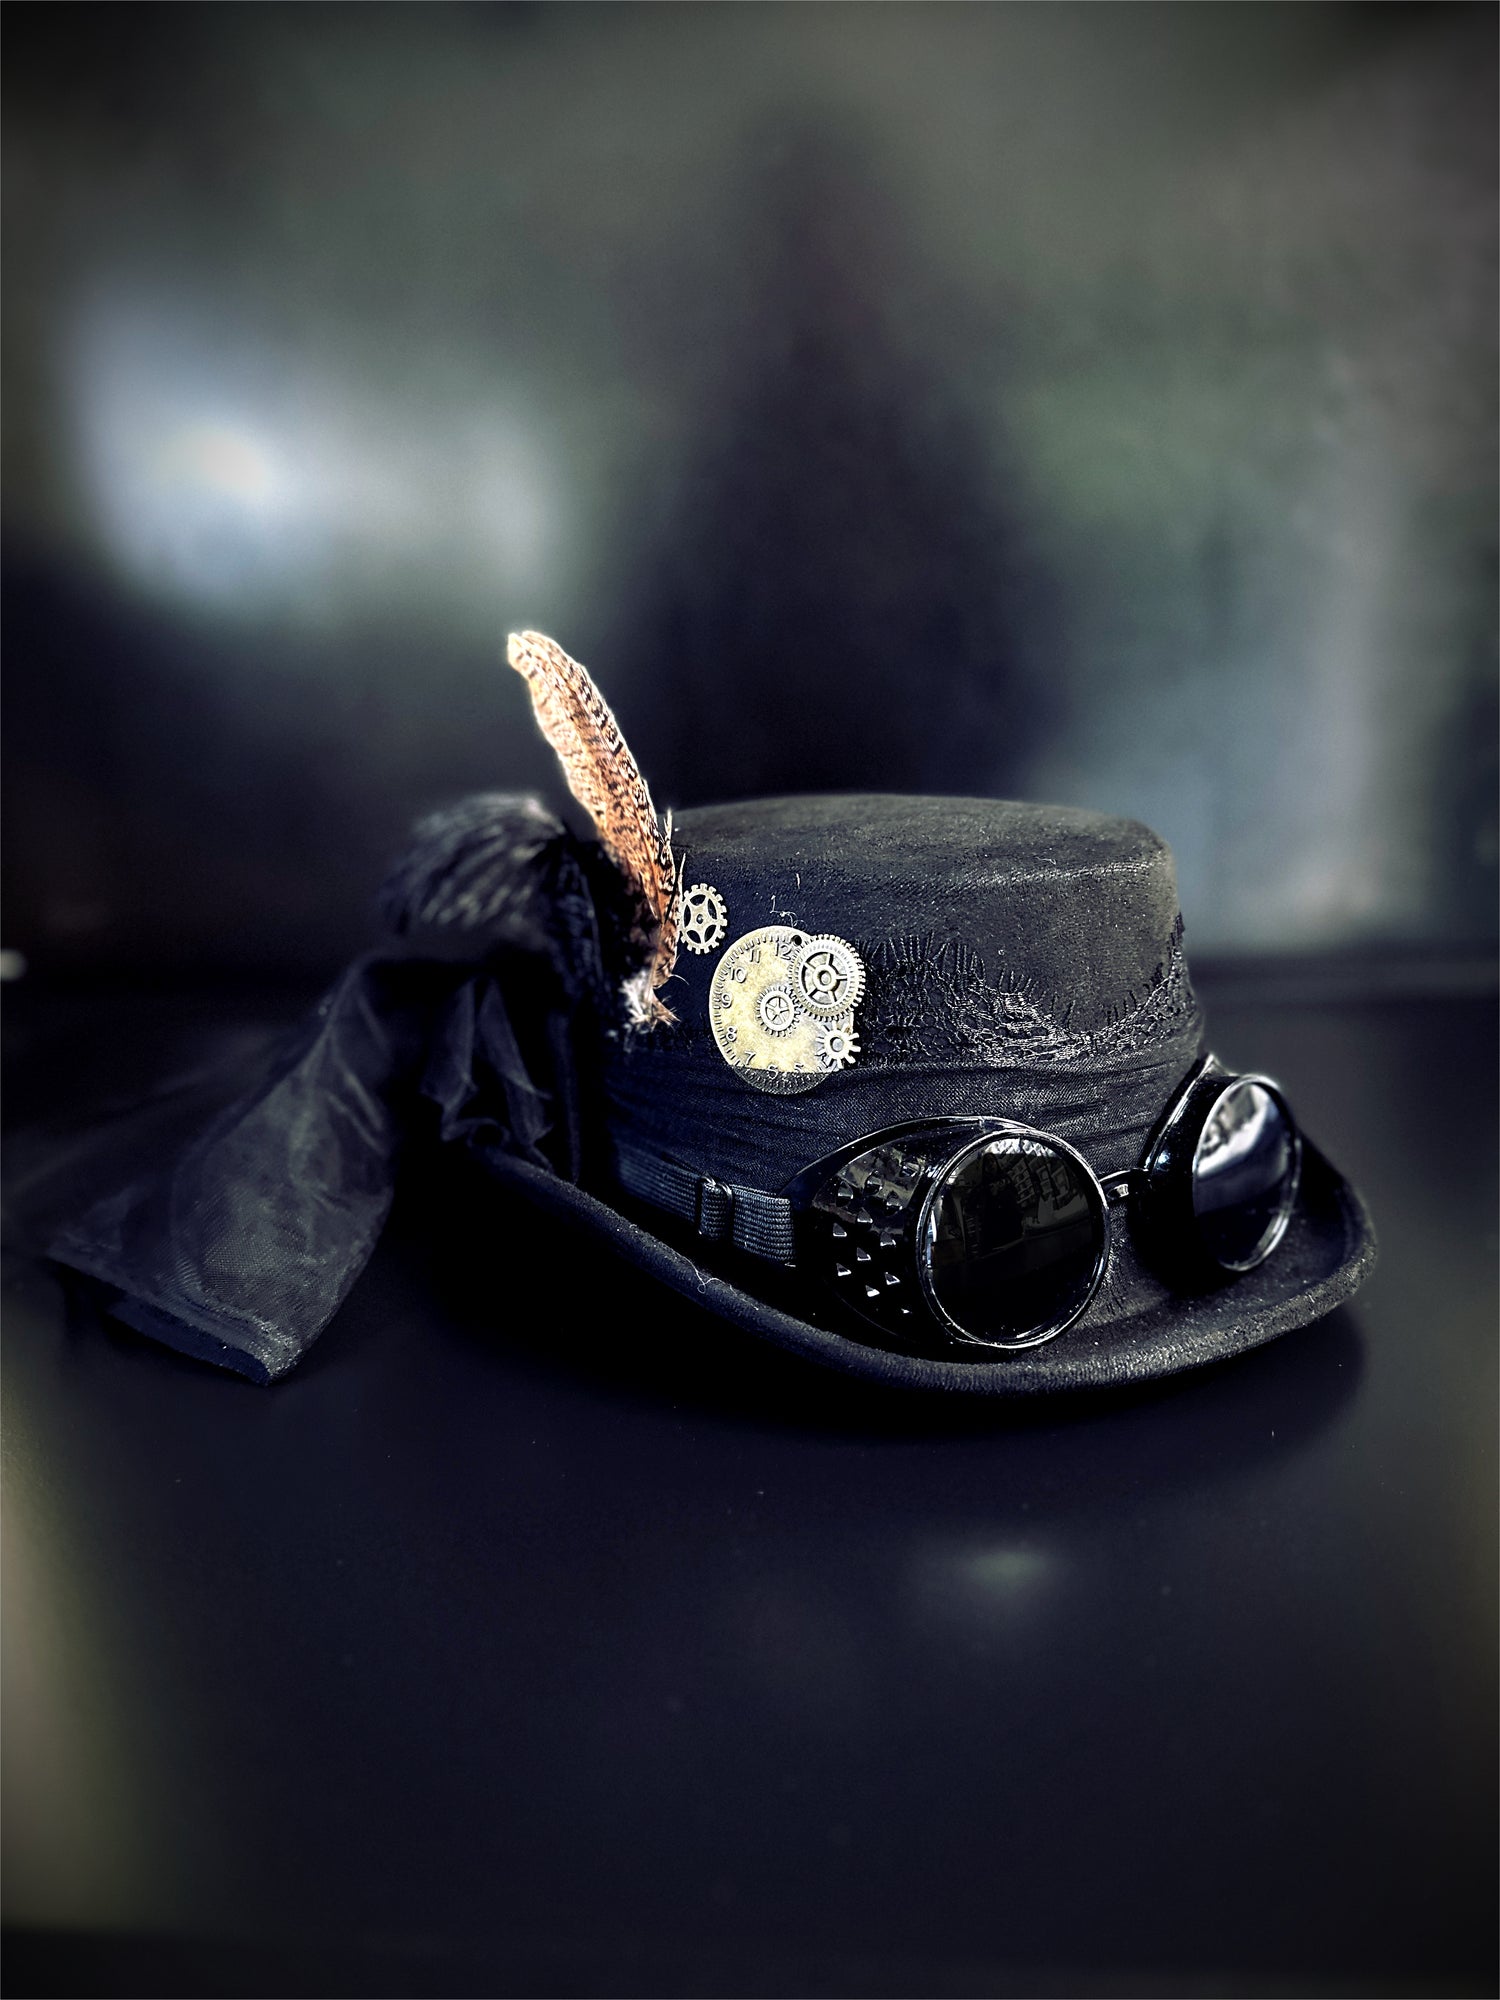 Black steampunk hat with a veil and goggles.